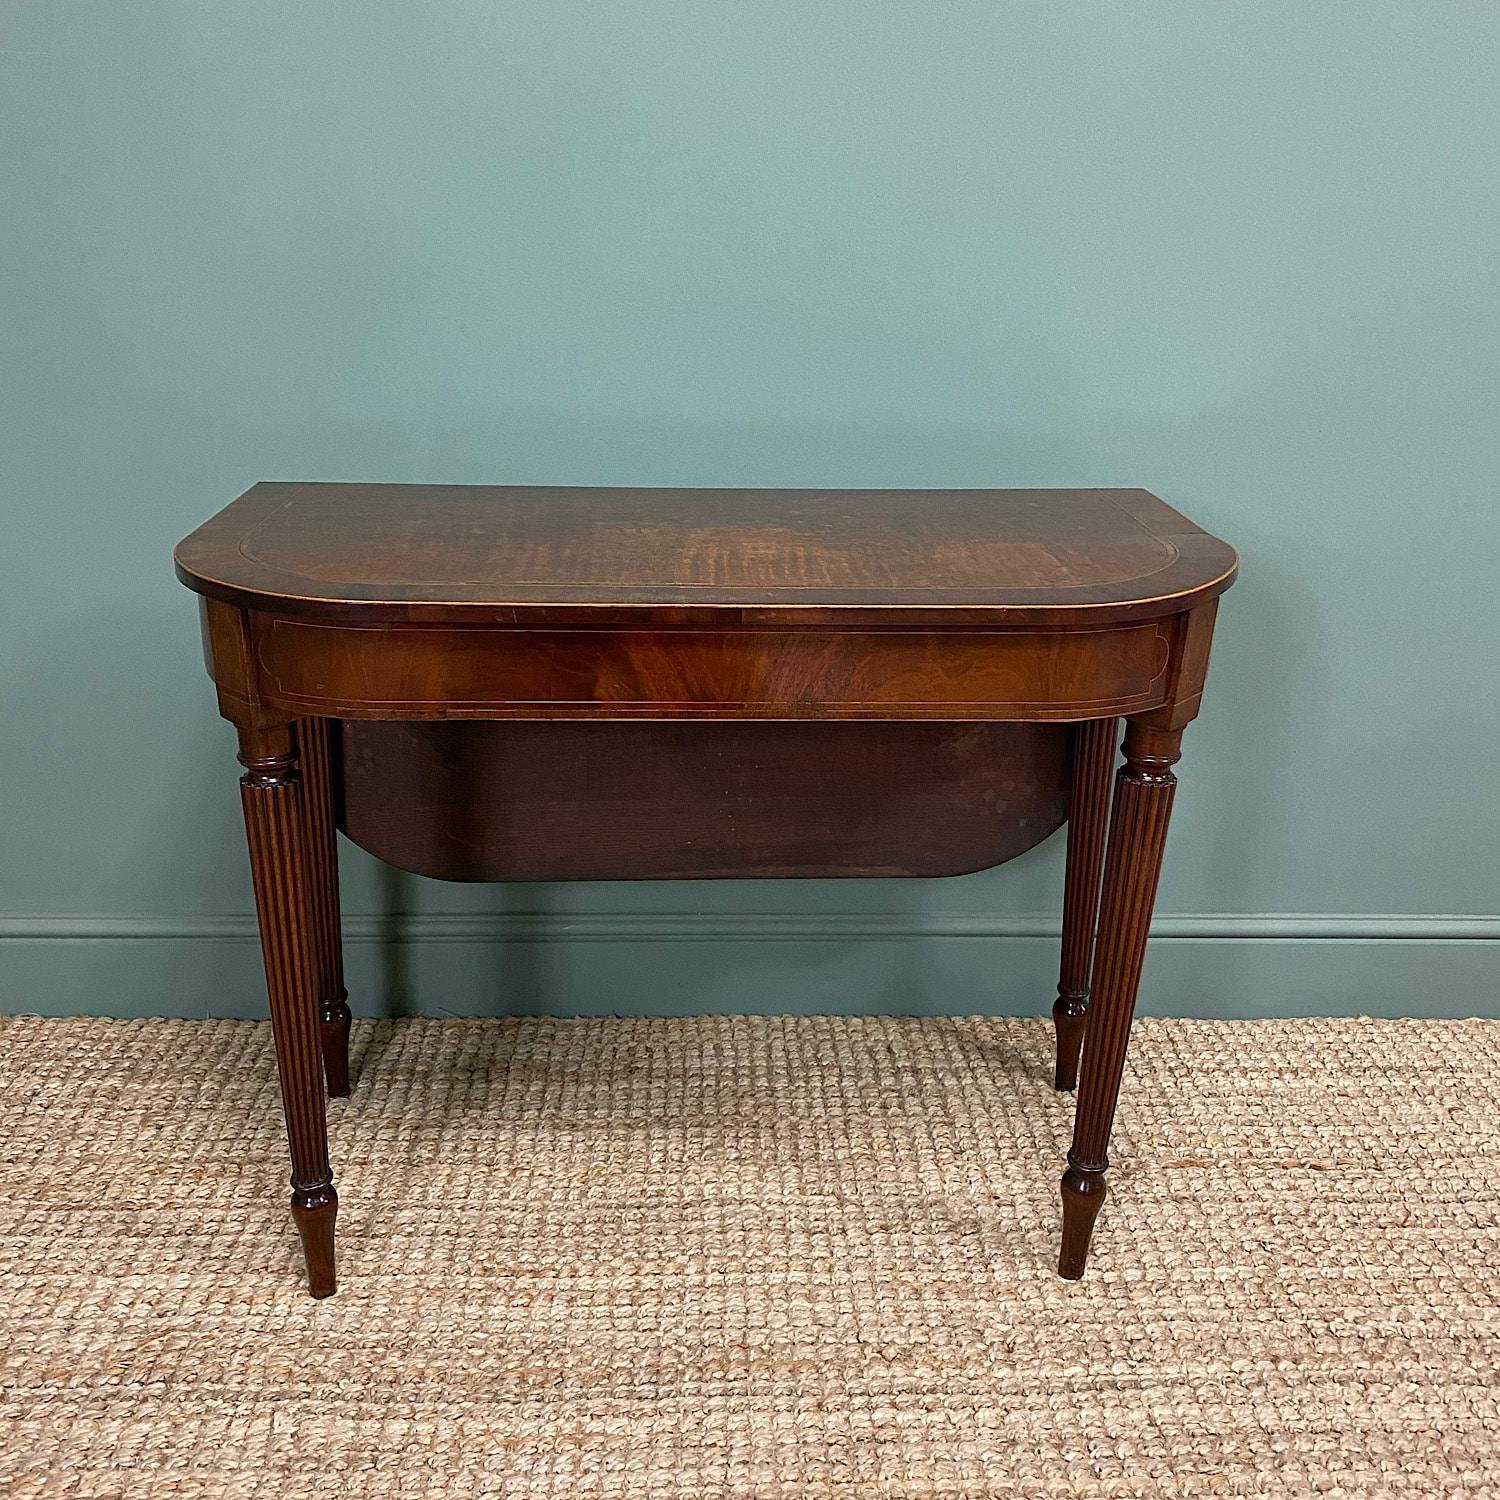 British Country House 19th century Georgian Antique Side Table / Tea Table For Sale